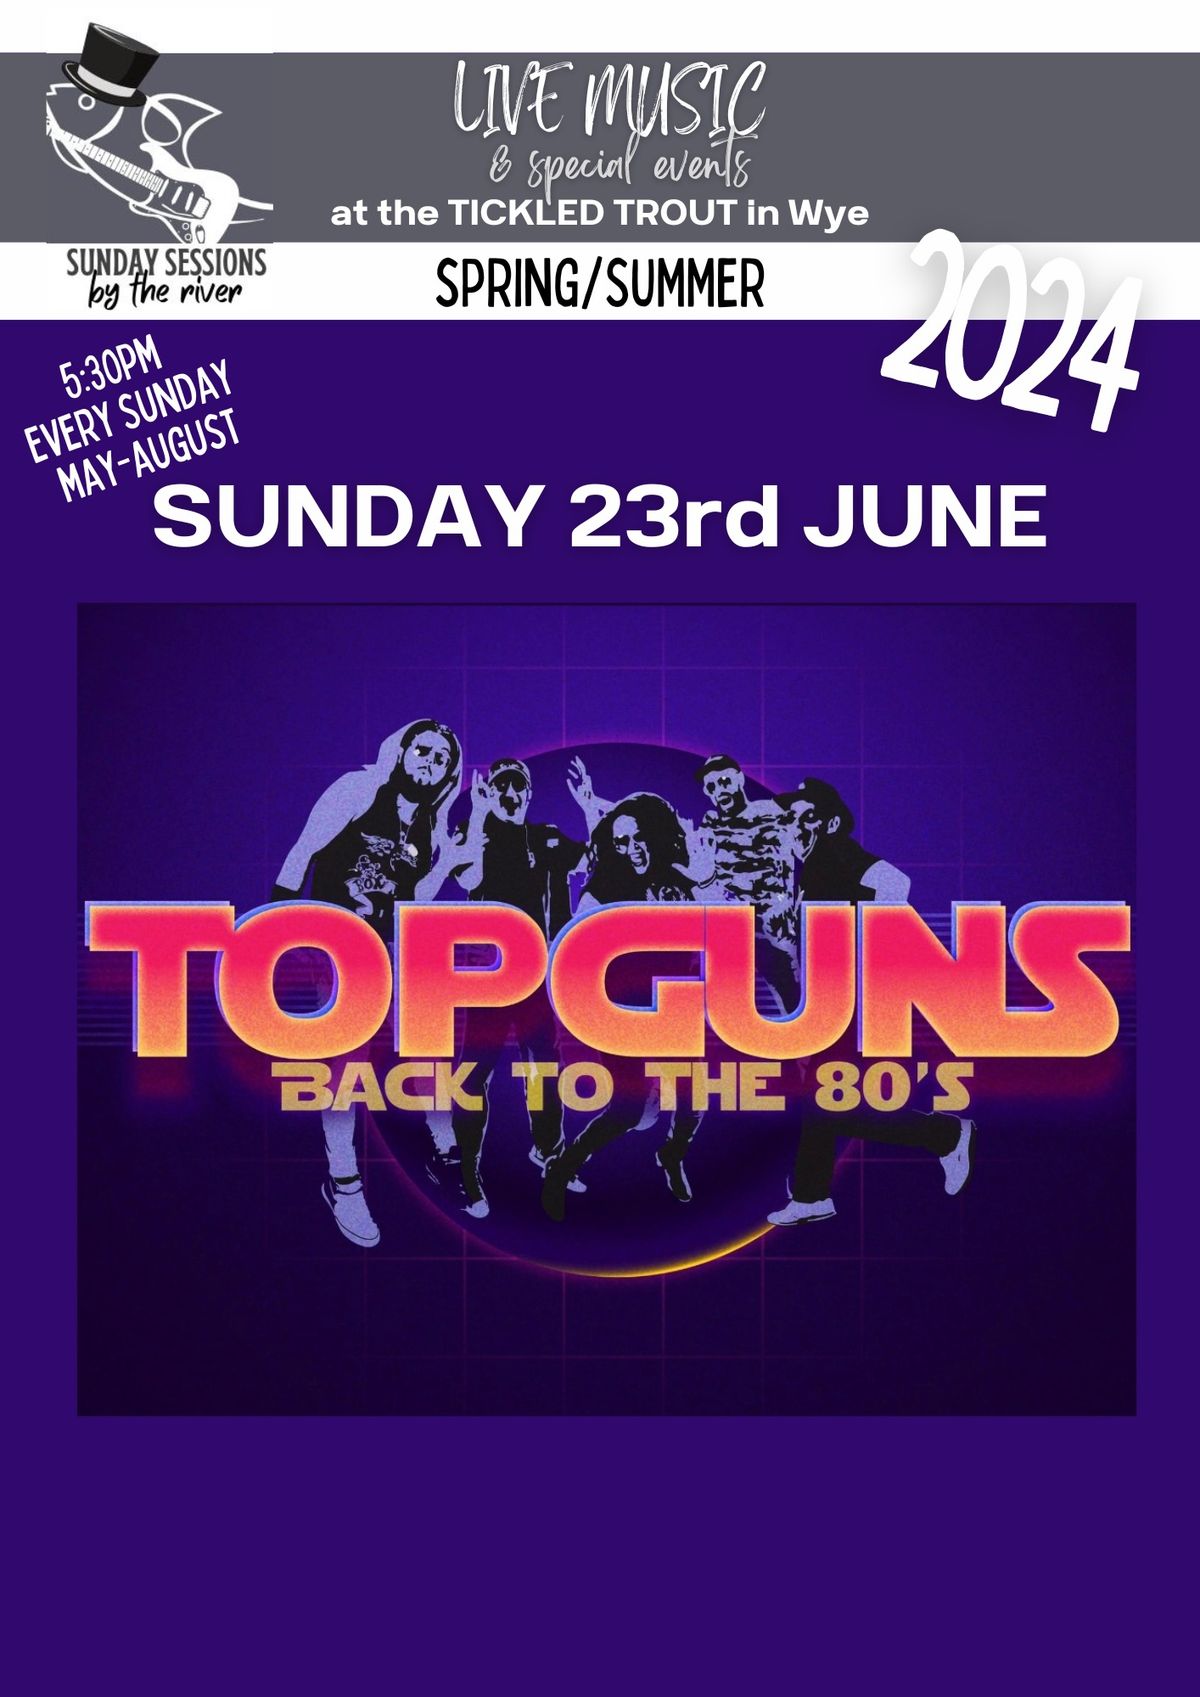 Sunday sessions by the river: Top Guns